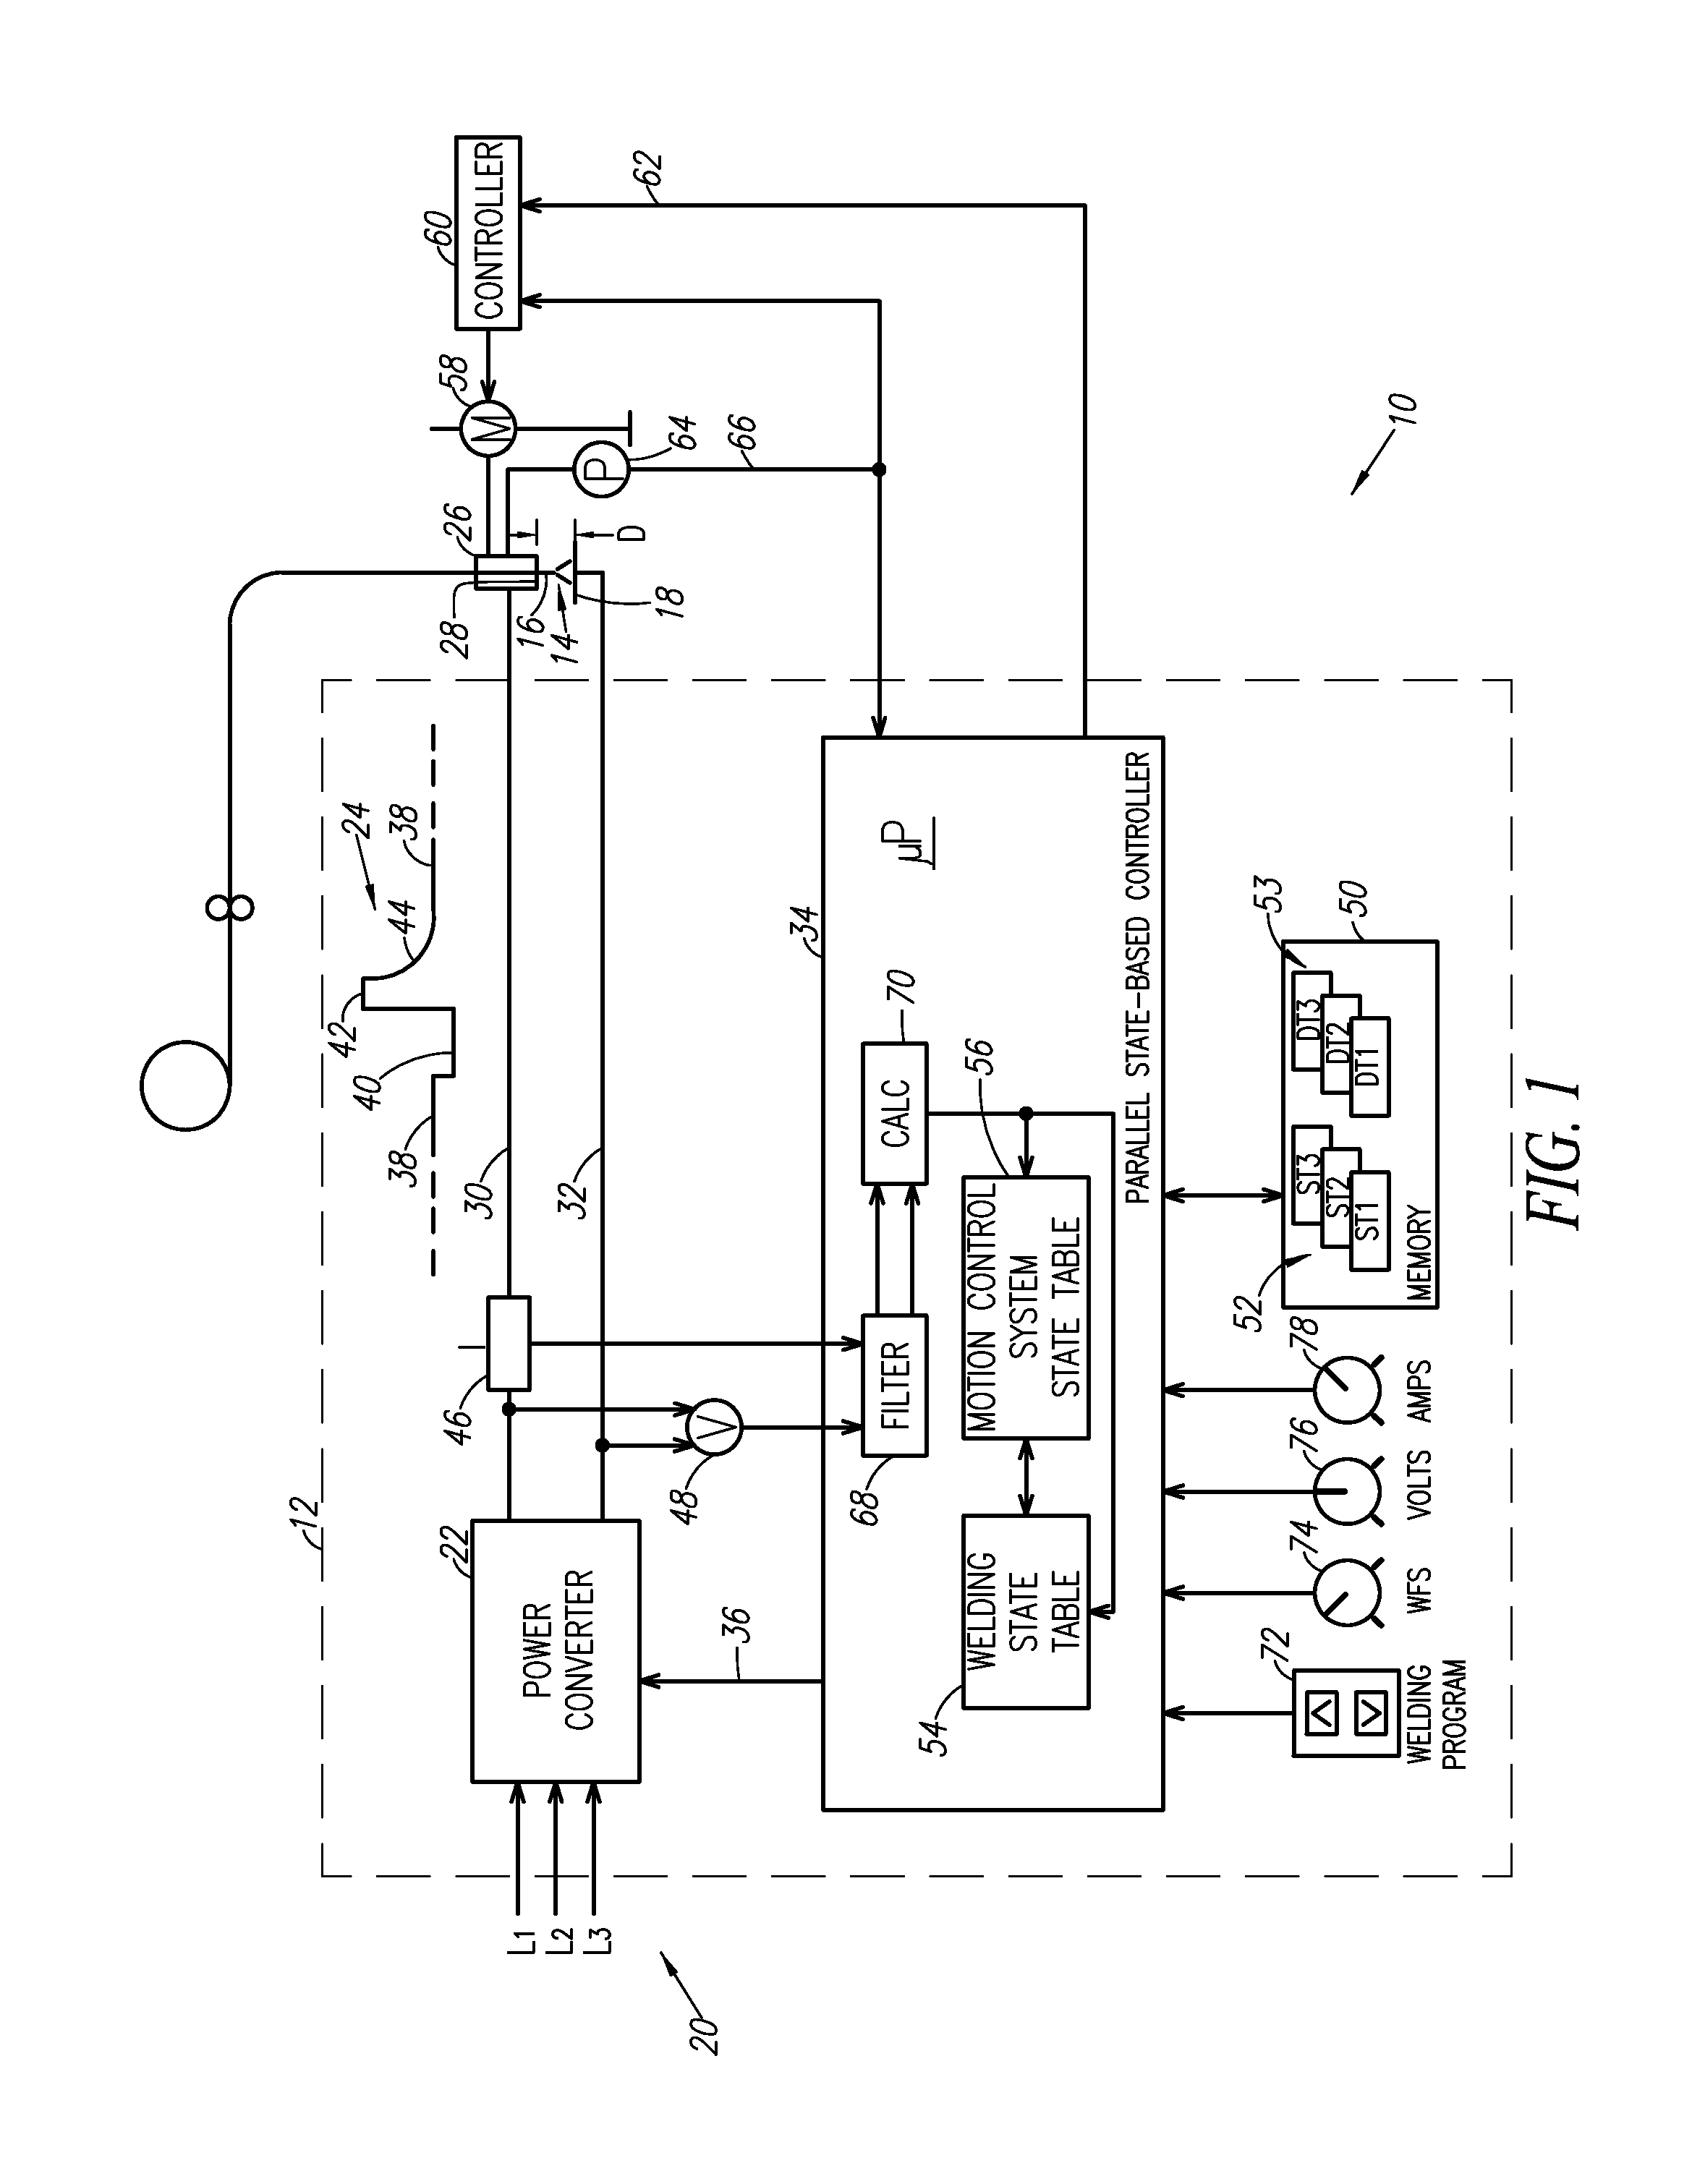 Parallel state-based controller for a welding power supply